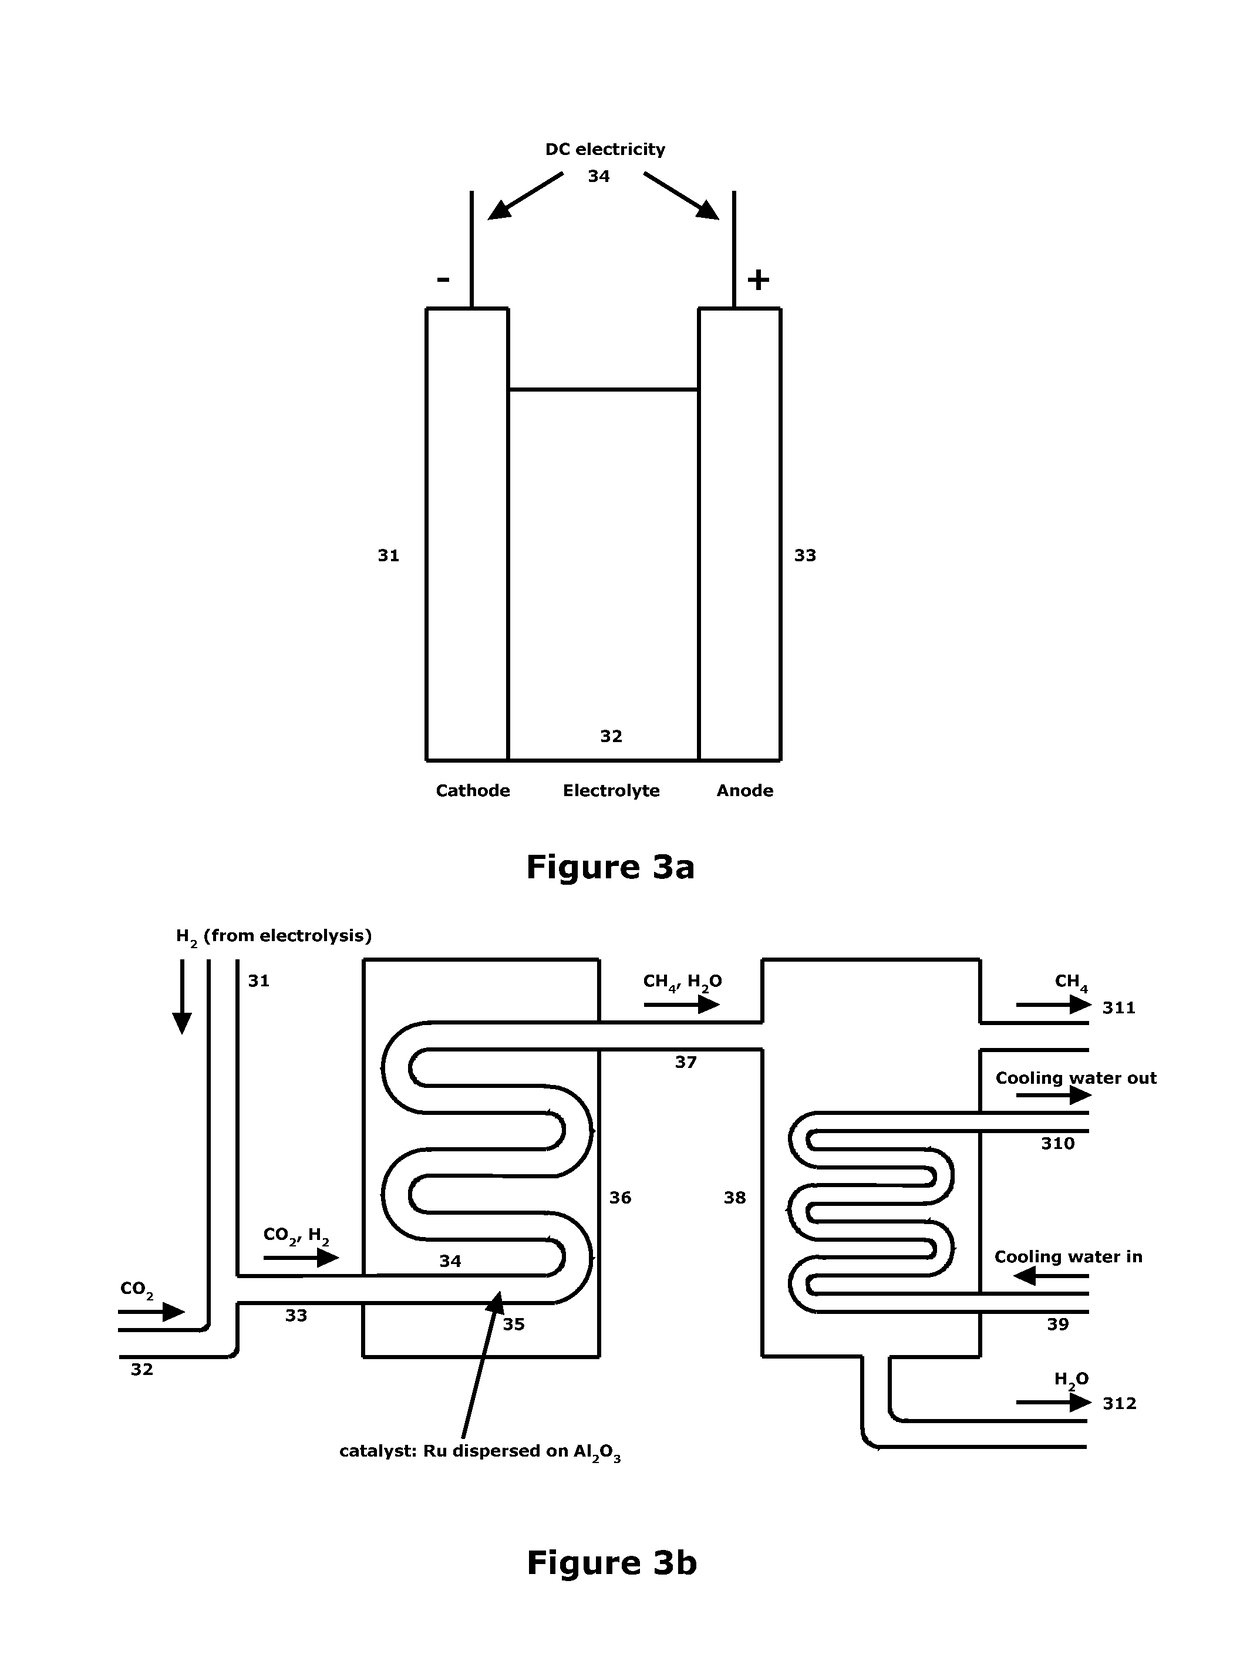 Methods and systems for energy conversion and generation